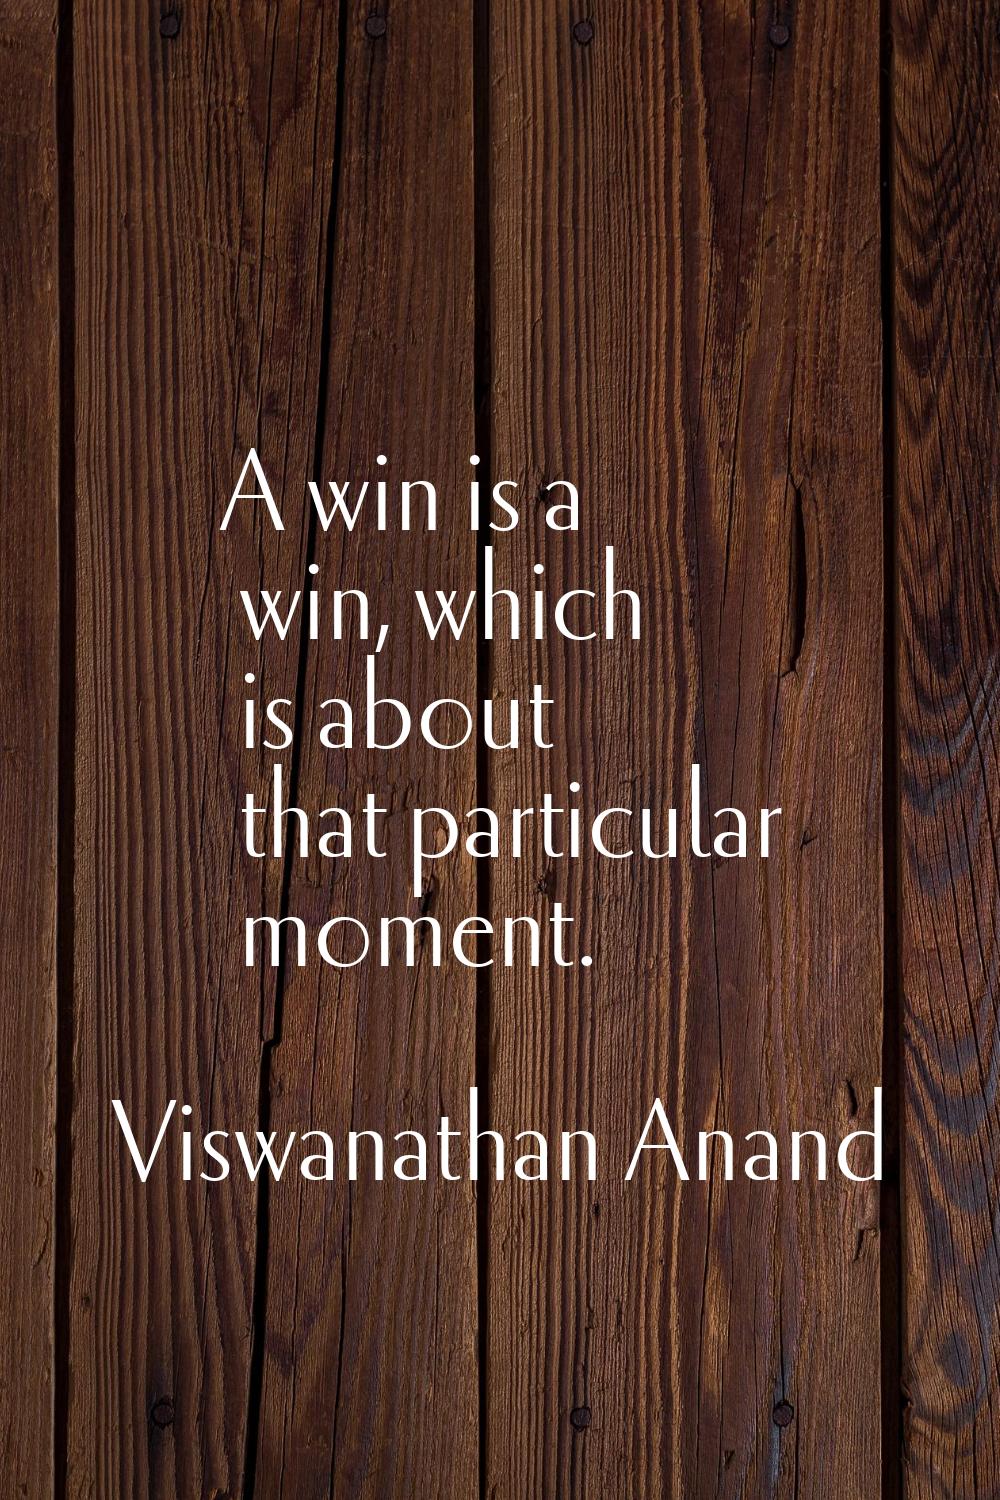 A win is a win, which is about that particular moment.